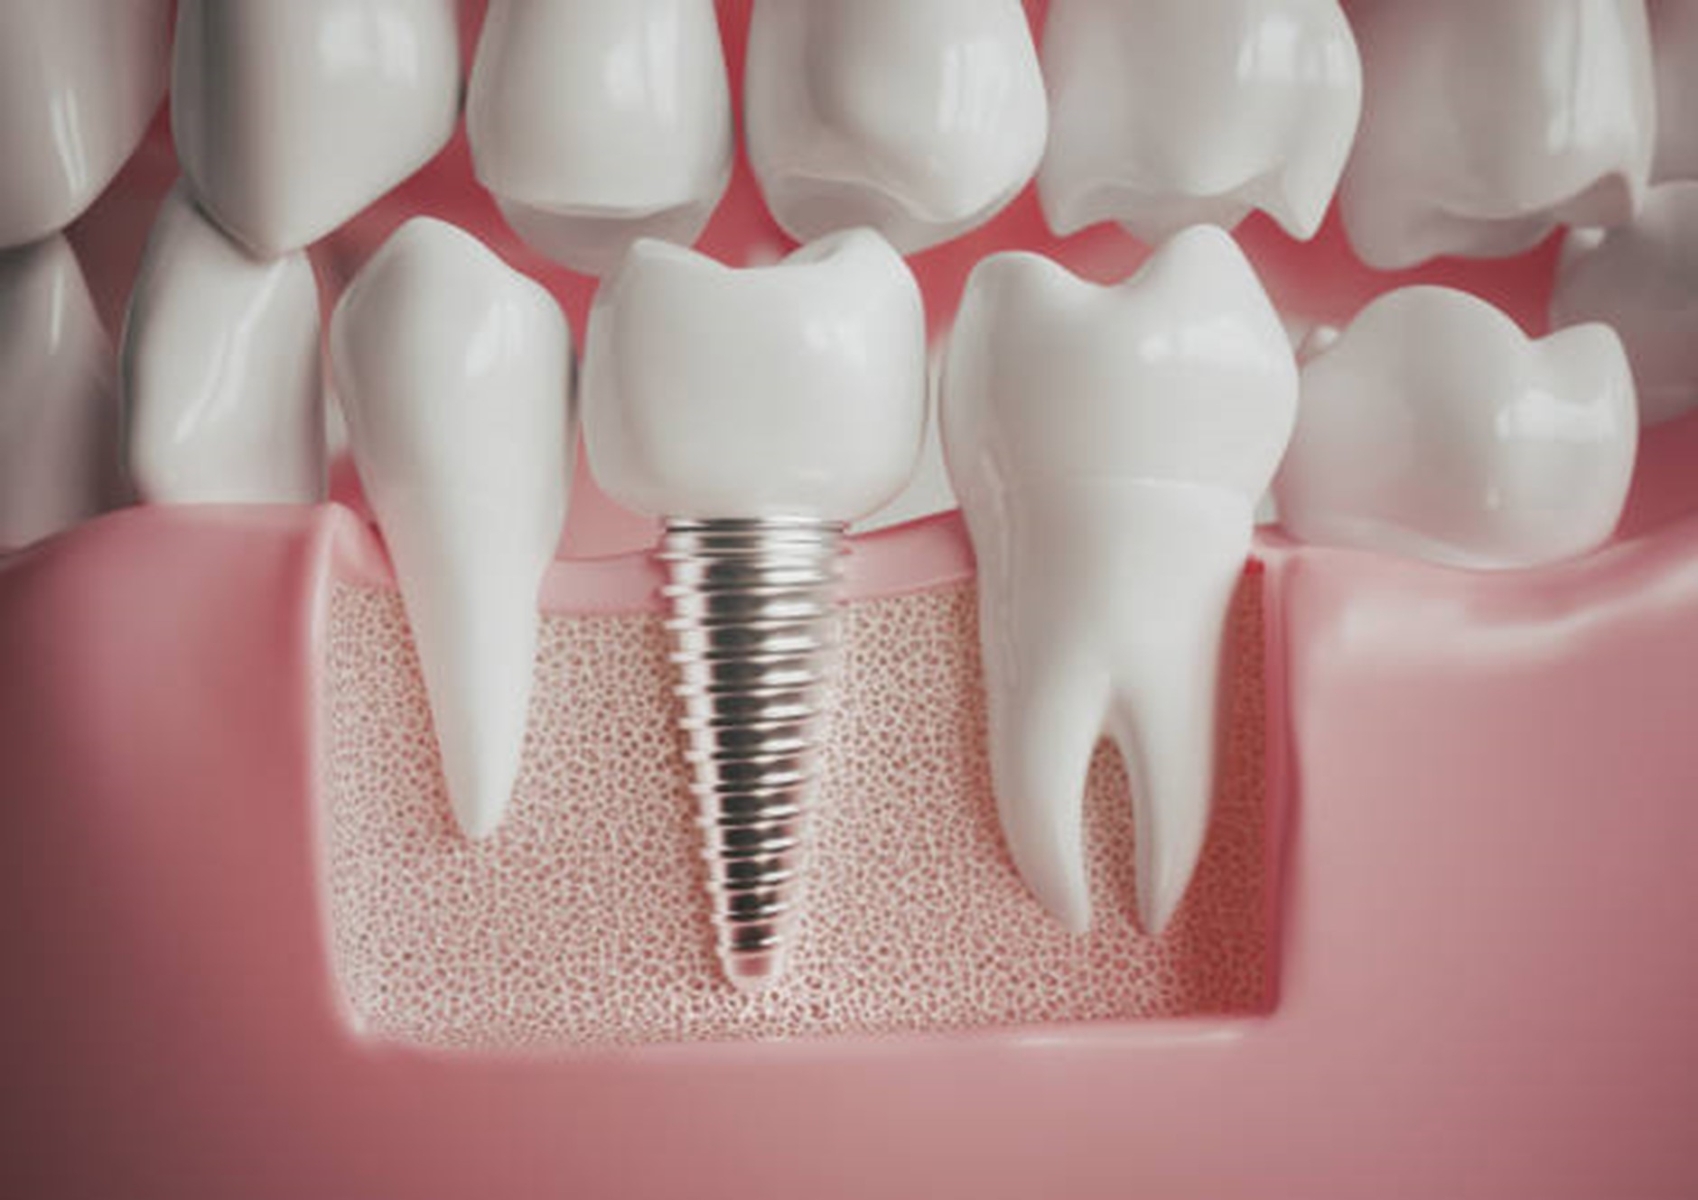 Why Dental Concepts Lead the Way when it comes to Dental Implants